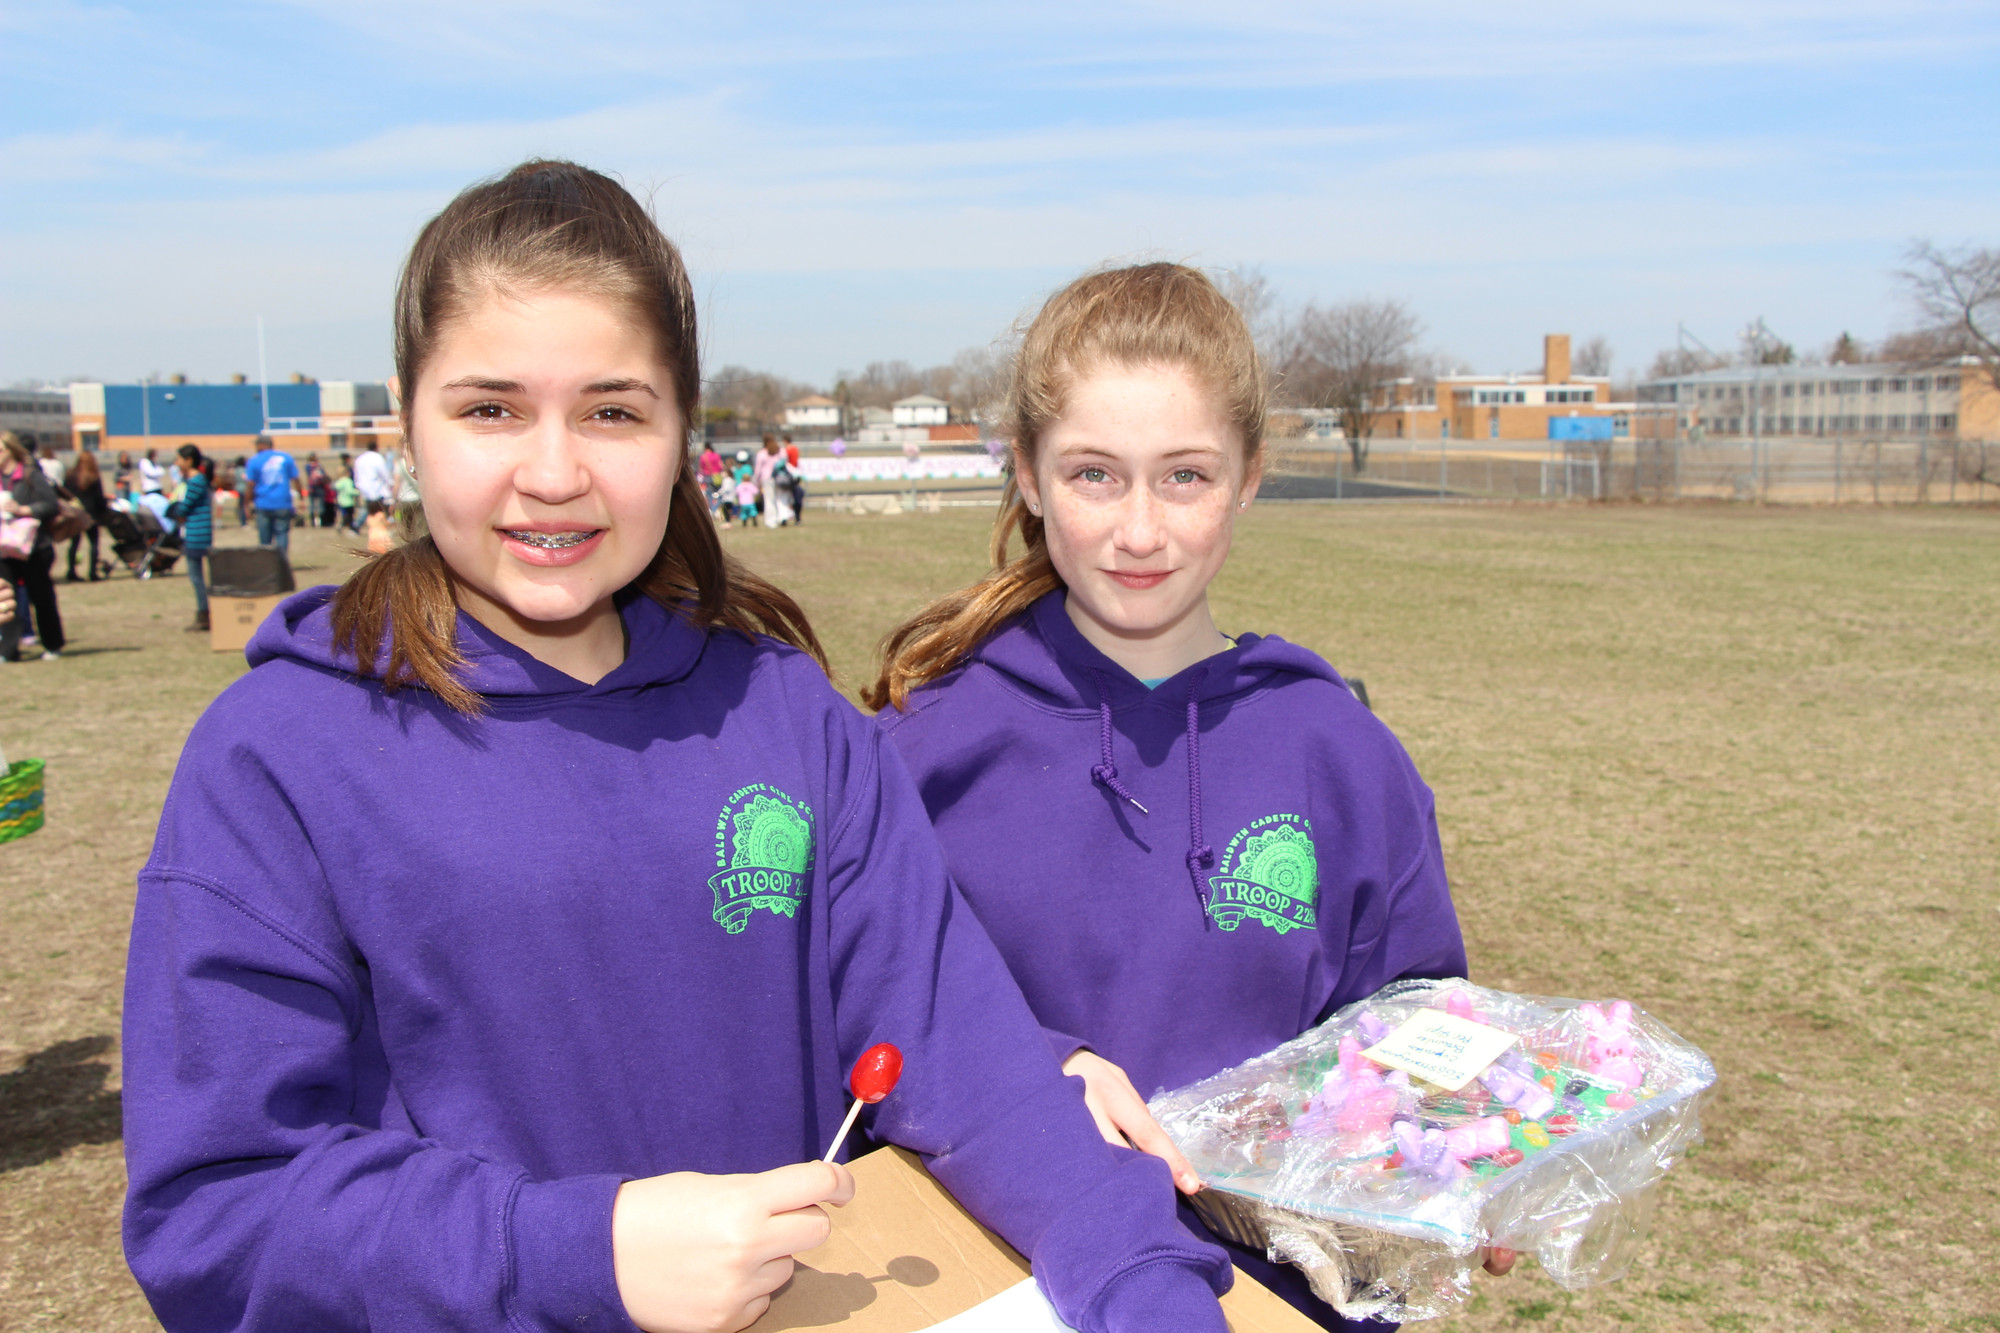 Grace Houser, left, and Shannon Dempsey helped many young children with some ball games.